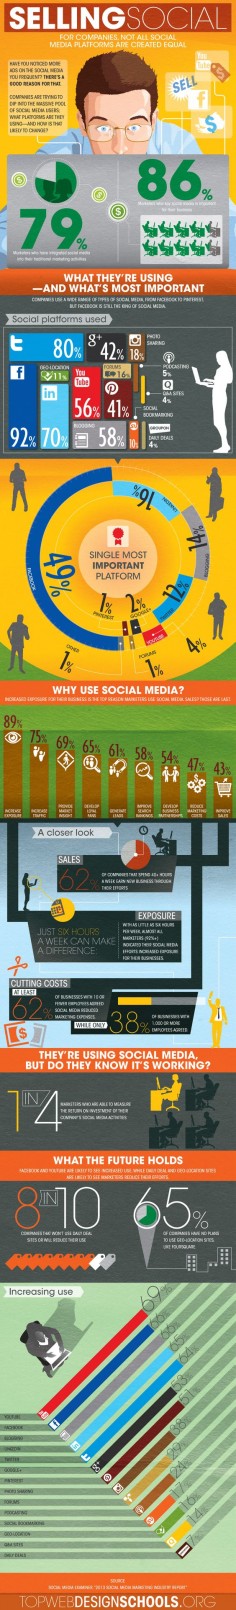 How (And Why) Brands Are Using Social Media For Business #INFOGRAPHIC #marketing